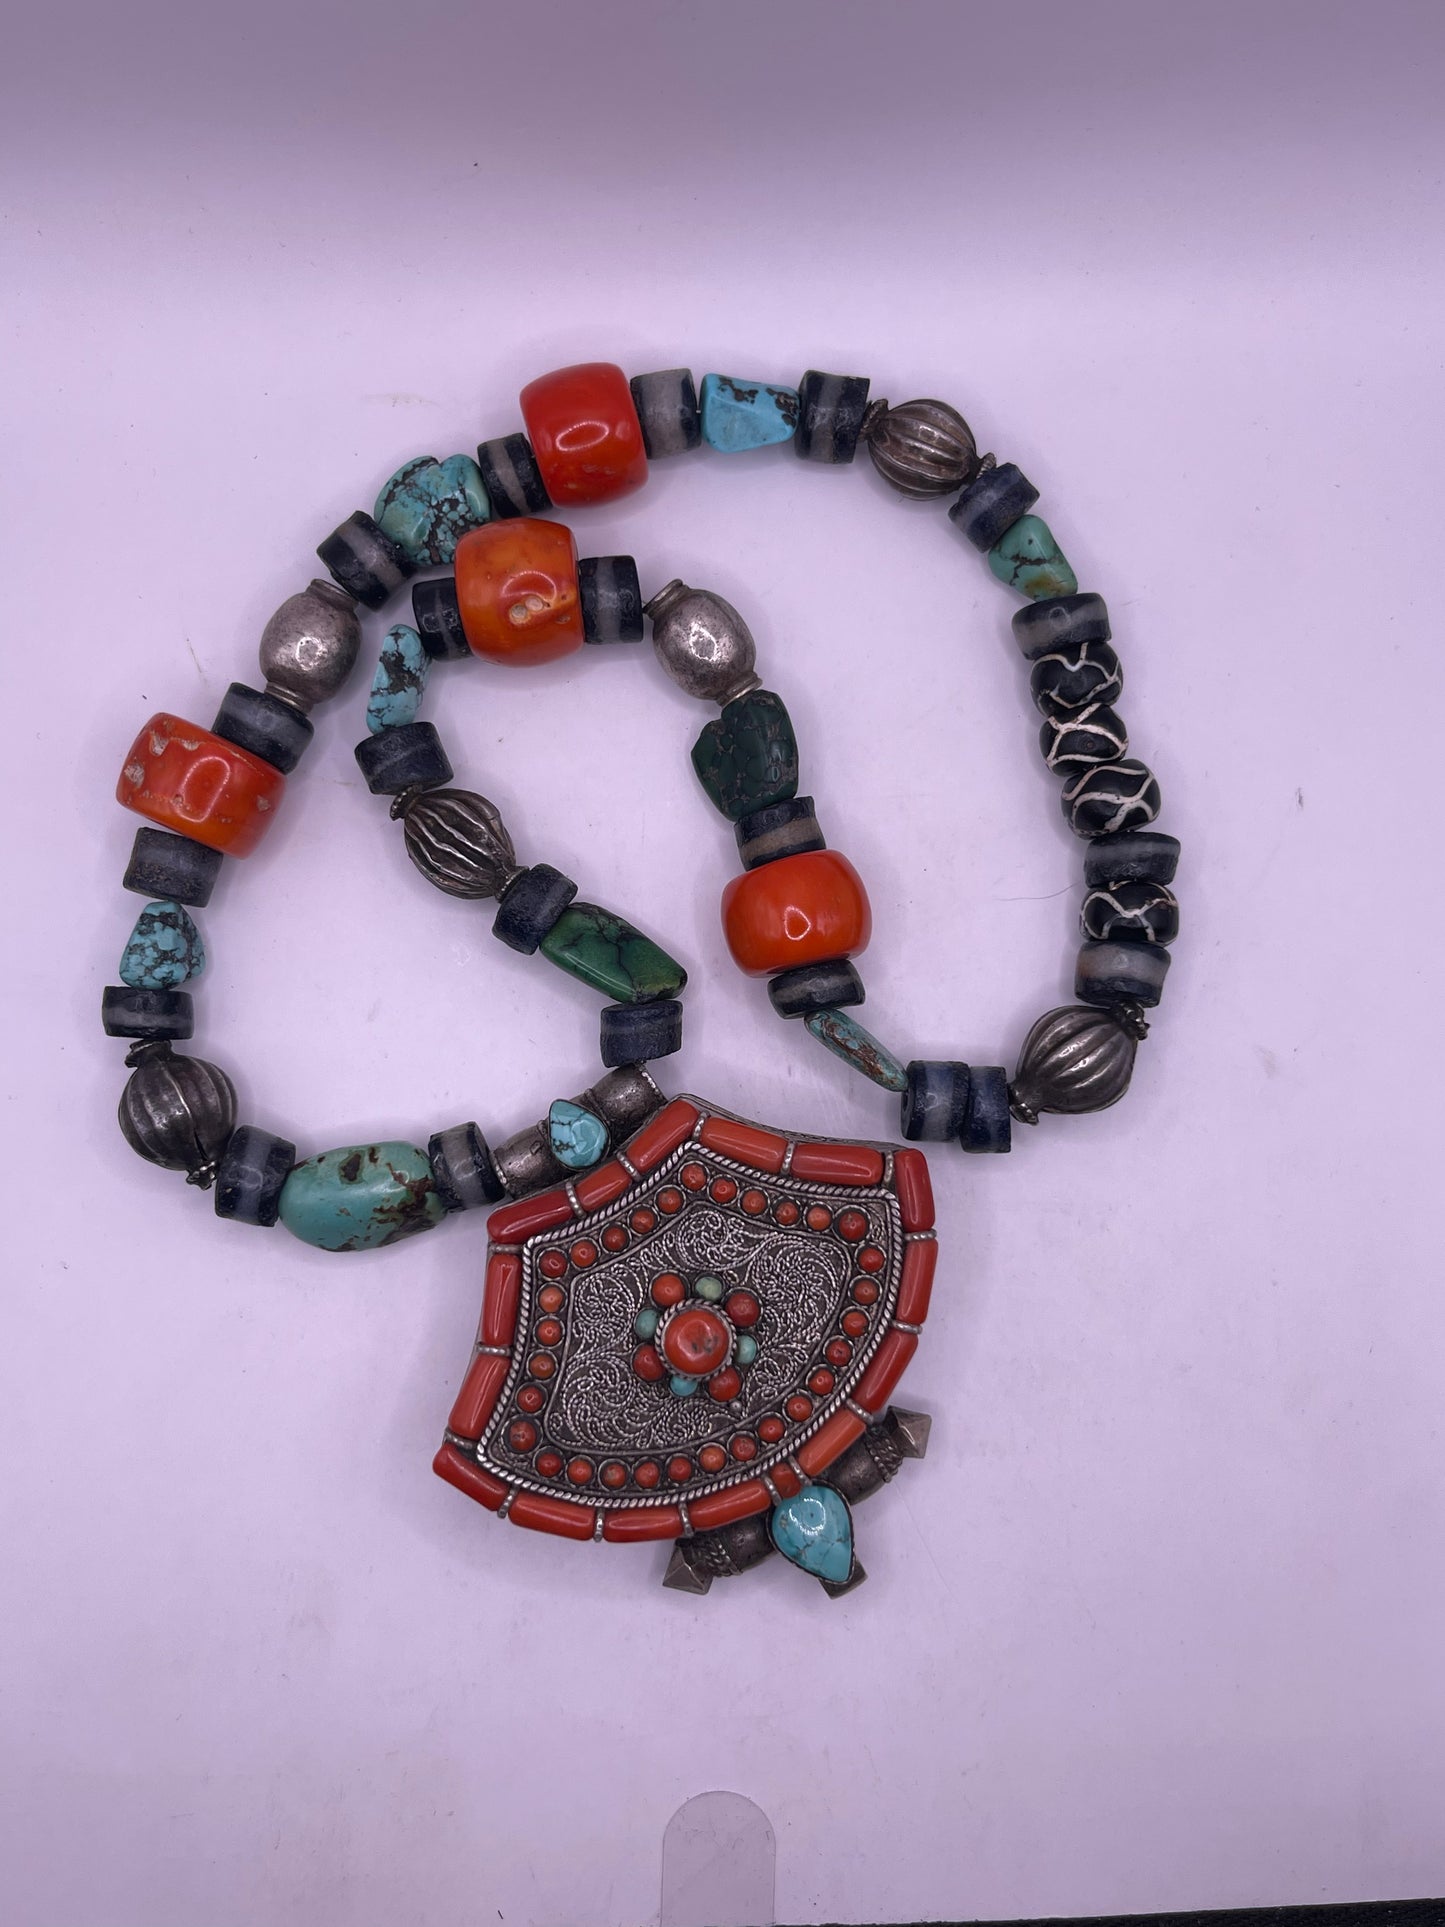 A vintage Tibetan silver ghau with a necklace with assorted beads